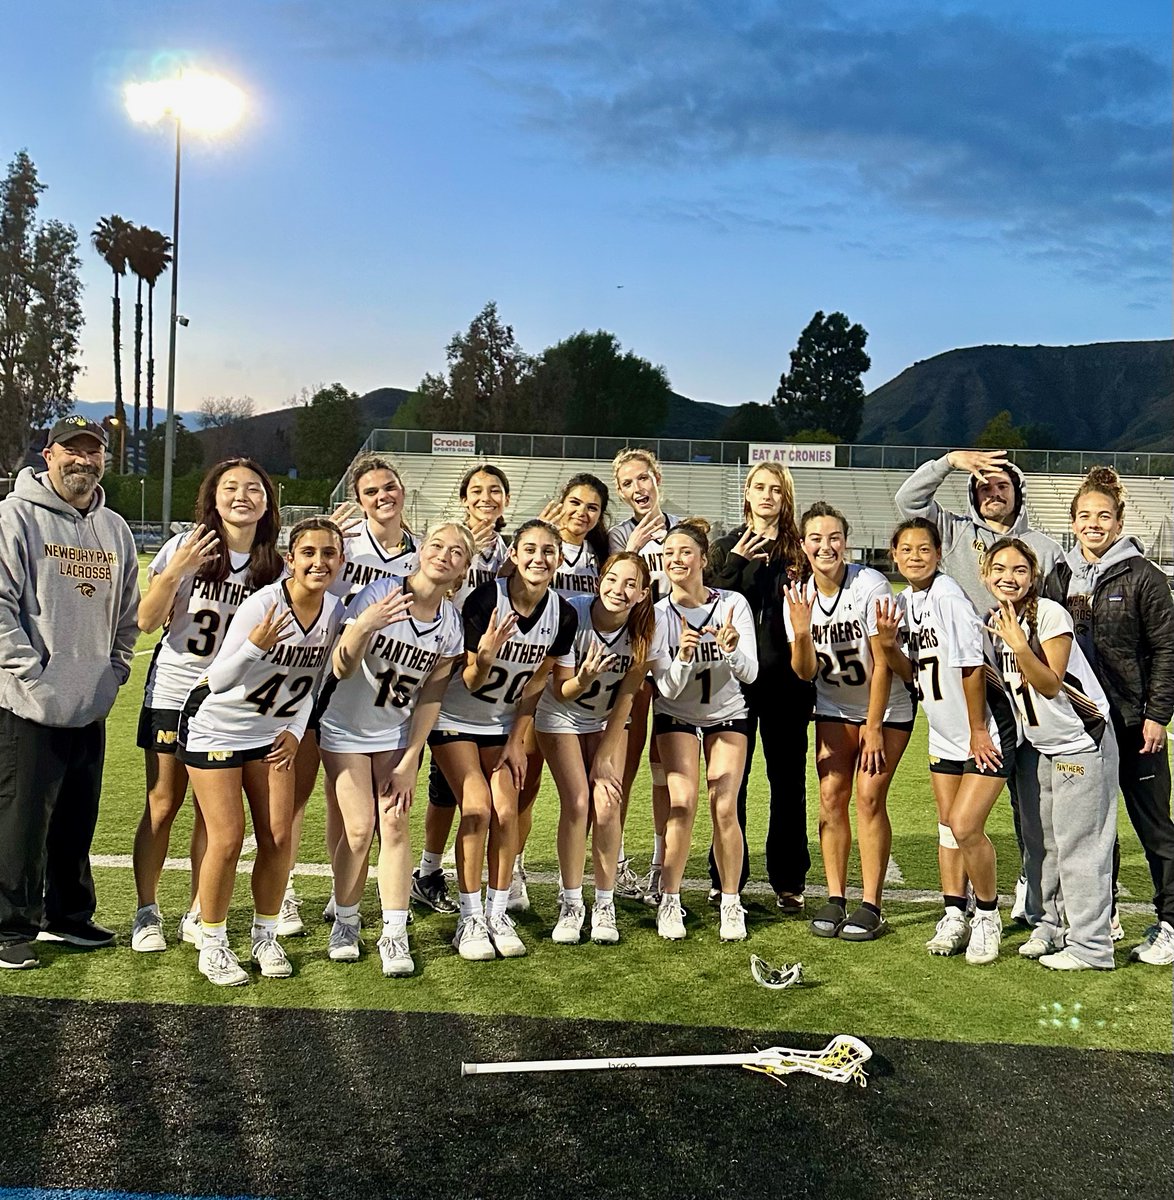 BIG CATS WIN FOURTH STRAIGHT LEAGUE TITLE Team feature on the Newbury Park High girls' lacrosse squad. Marmonte League champs open CIF playoffs tonight at home. Photo courtesy of Savannah Sutherland. My article in this week's T.O. Acorn: toacorn.com/articles/big-c…